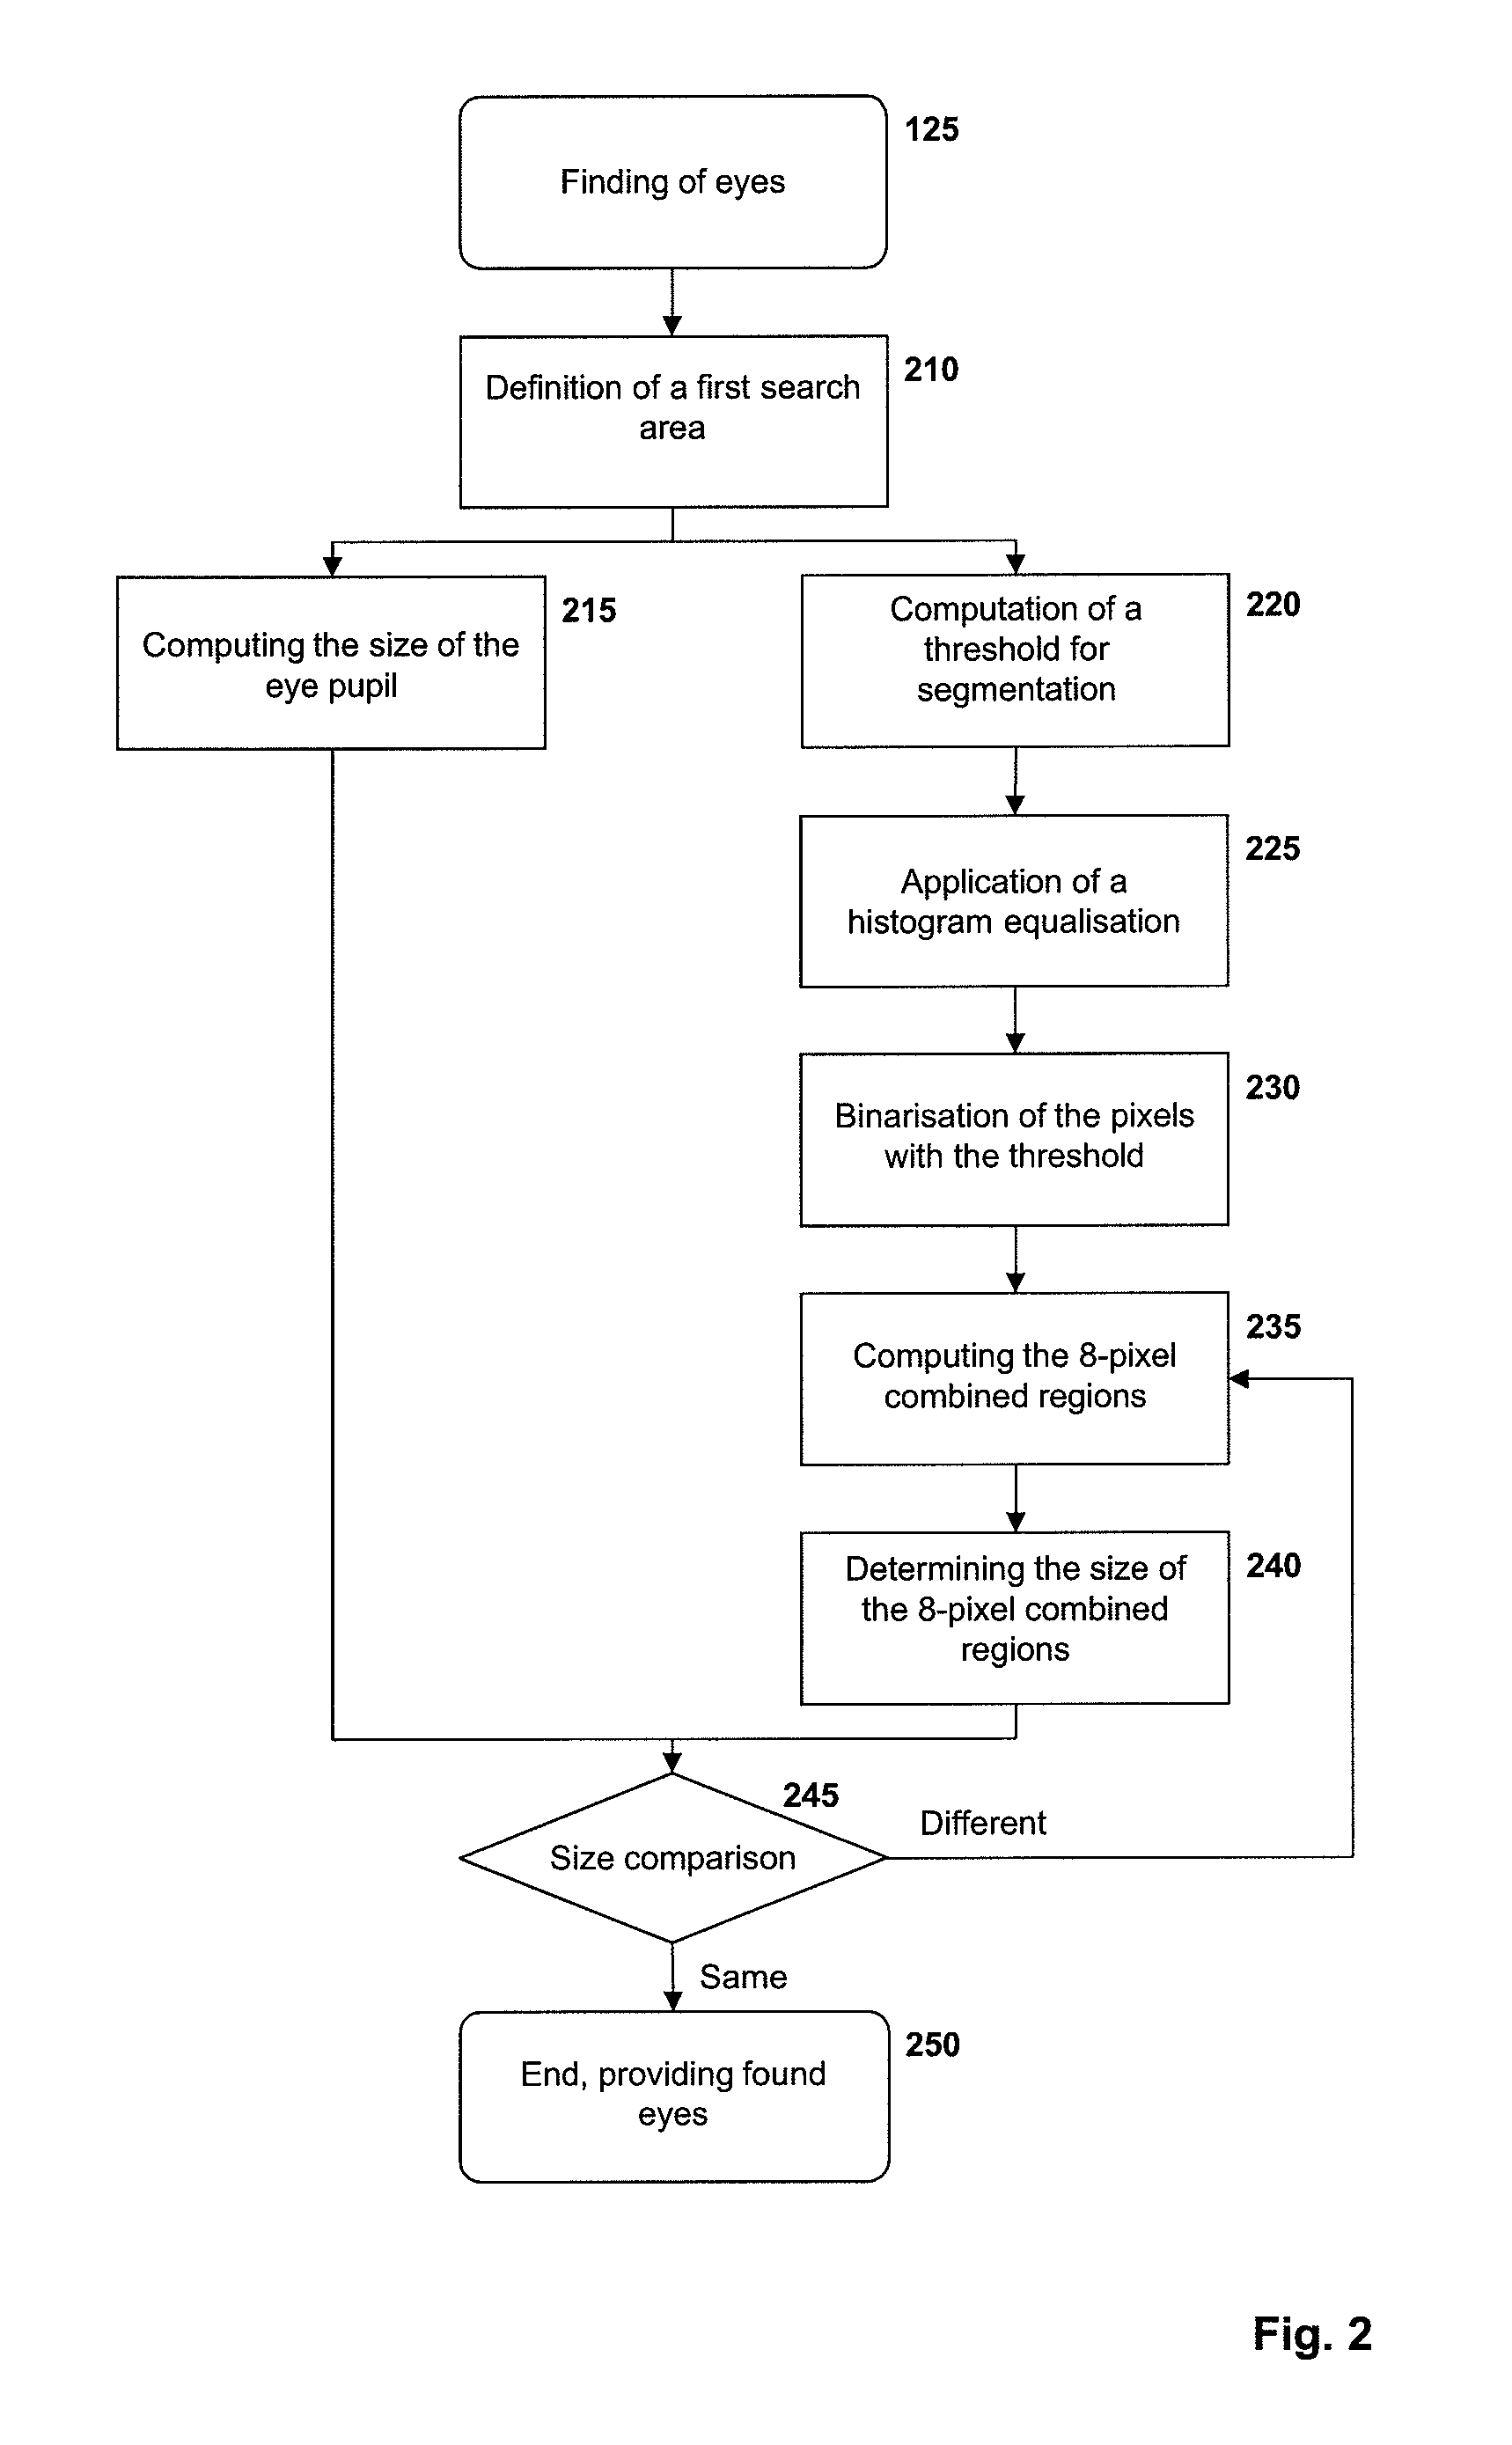 Method and device for finding and tracking pairs of eyes